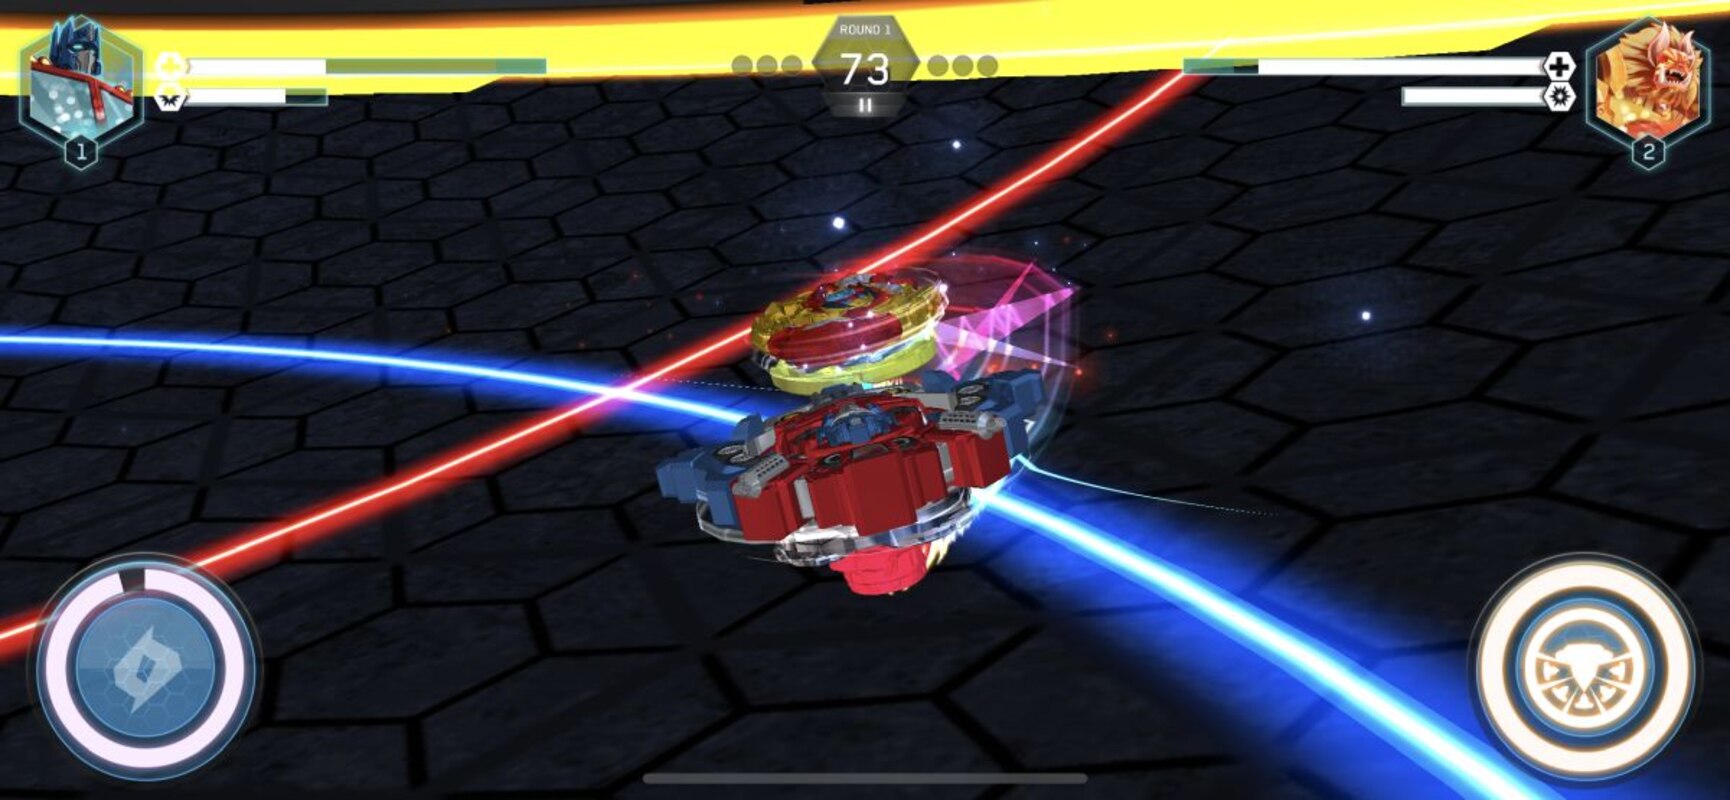 Transformers x… Beyblade? New Beyblade Burst app update features TF  character tops – The Allspark